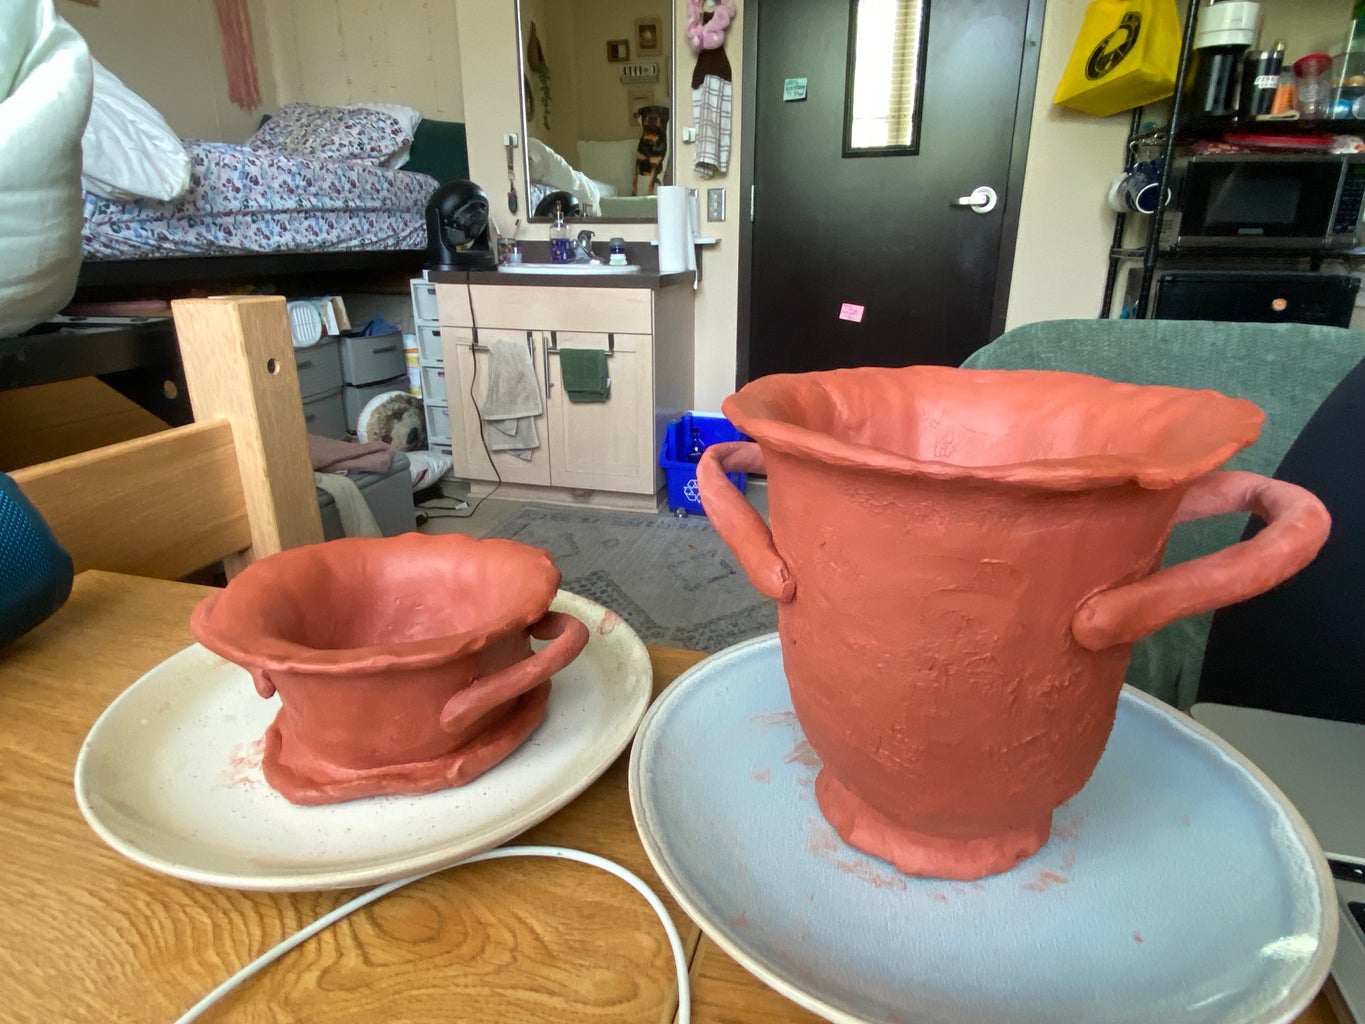 Two clay pots